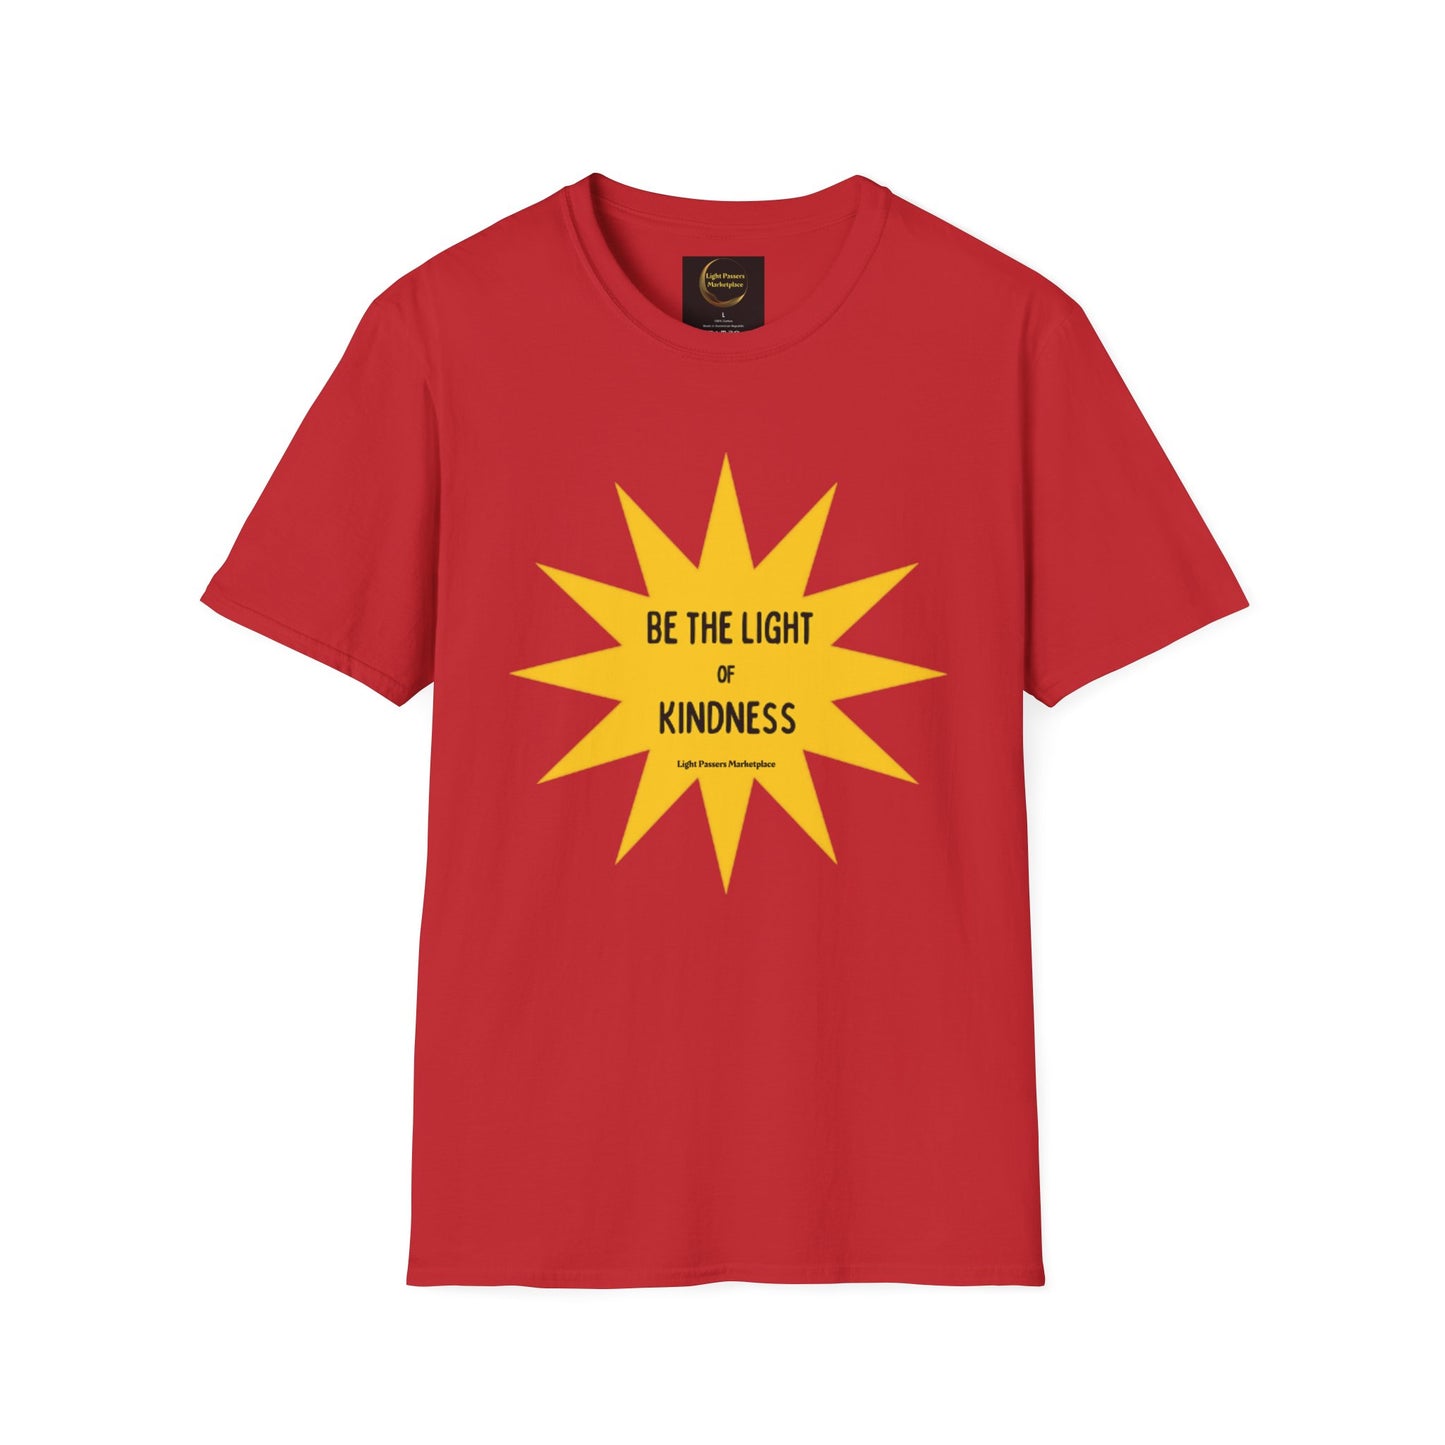 Unisex Be the Light of Kindness T-shirt featuring a yellow star design on a red shirt. 100% cotton, no side seams, tape on shoulders for durability. Classic fit, tear-away label, true to size.